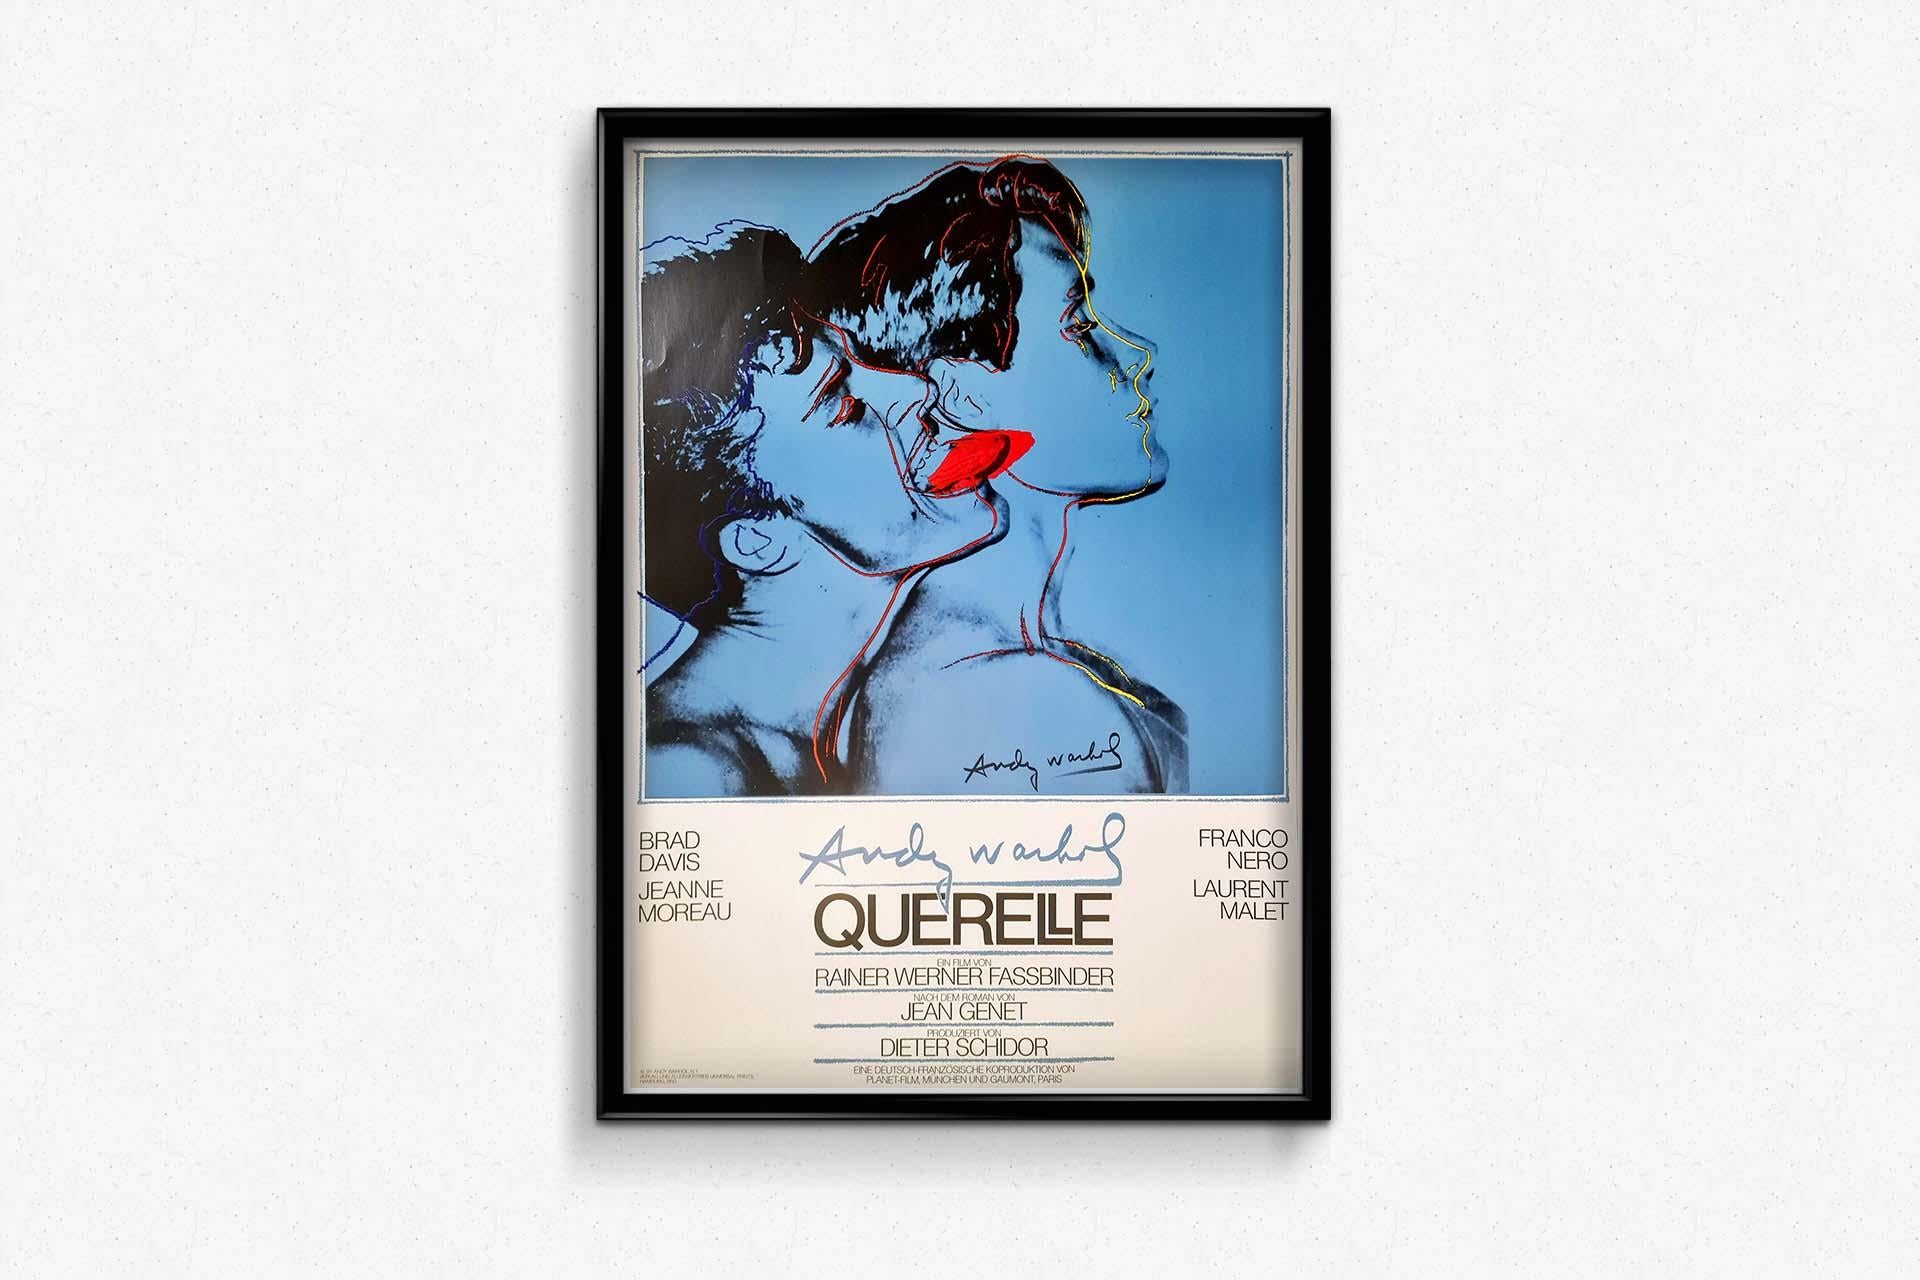 Andy Warhol's original poster for the 1982 film 